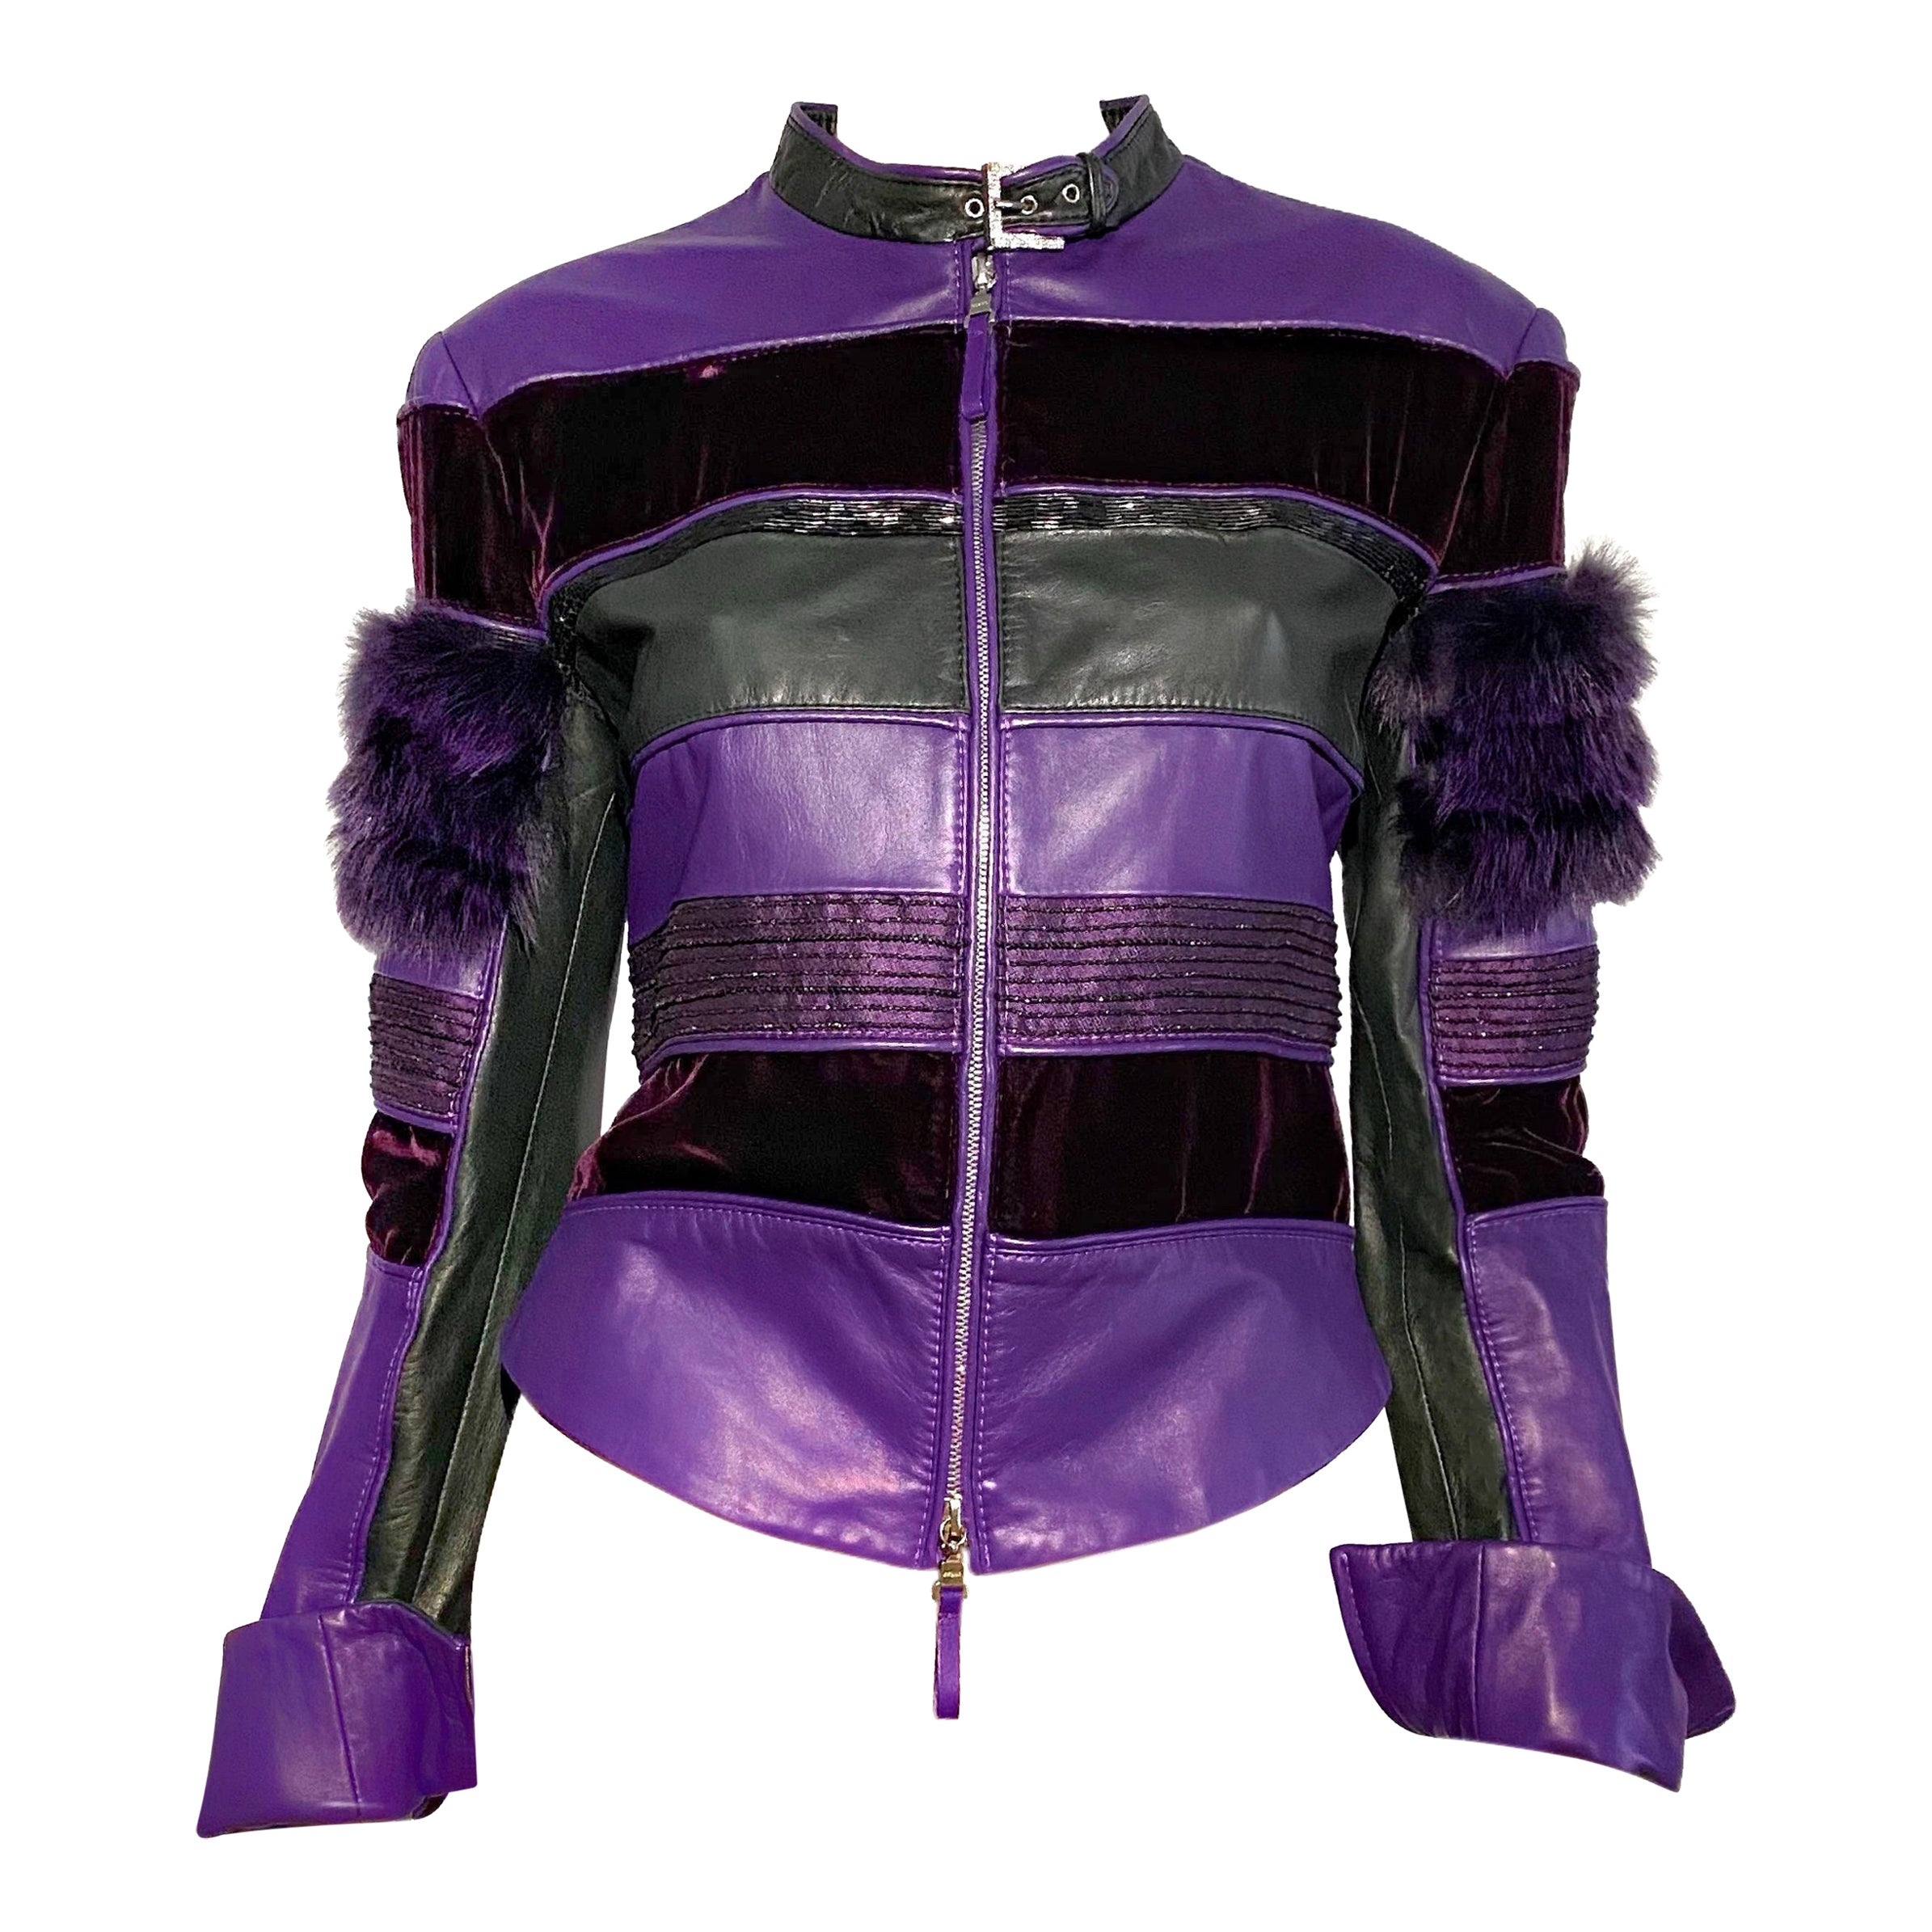 Gianfranco Ferrè runway leather jacket from Fall/Winter 2002, look 52 on the runway 

- Dyed purple/forest green lambskin leather
- Swarovski buckle
- Dyed fox fur sleeves
- Black velvet cuts
- Hand-made beadwork
- Lace-up side panels

Size